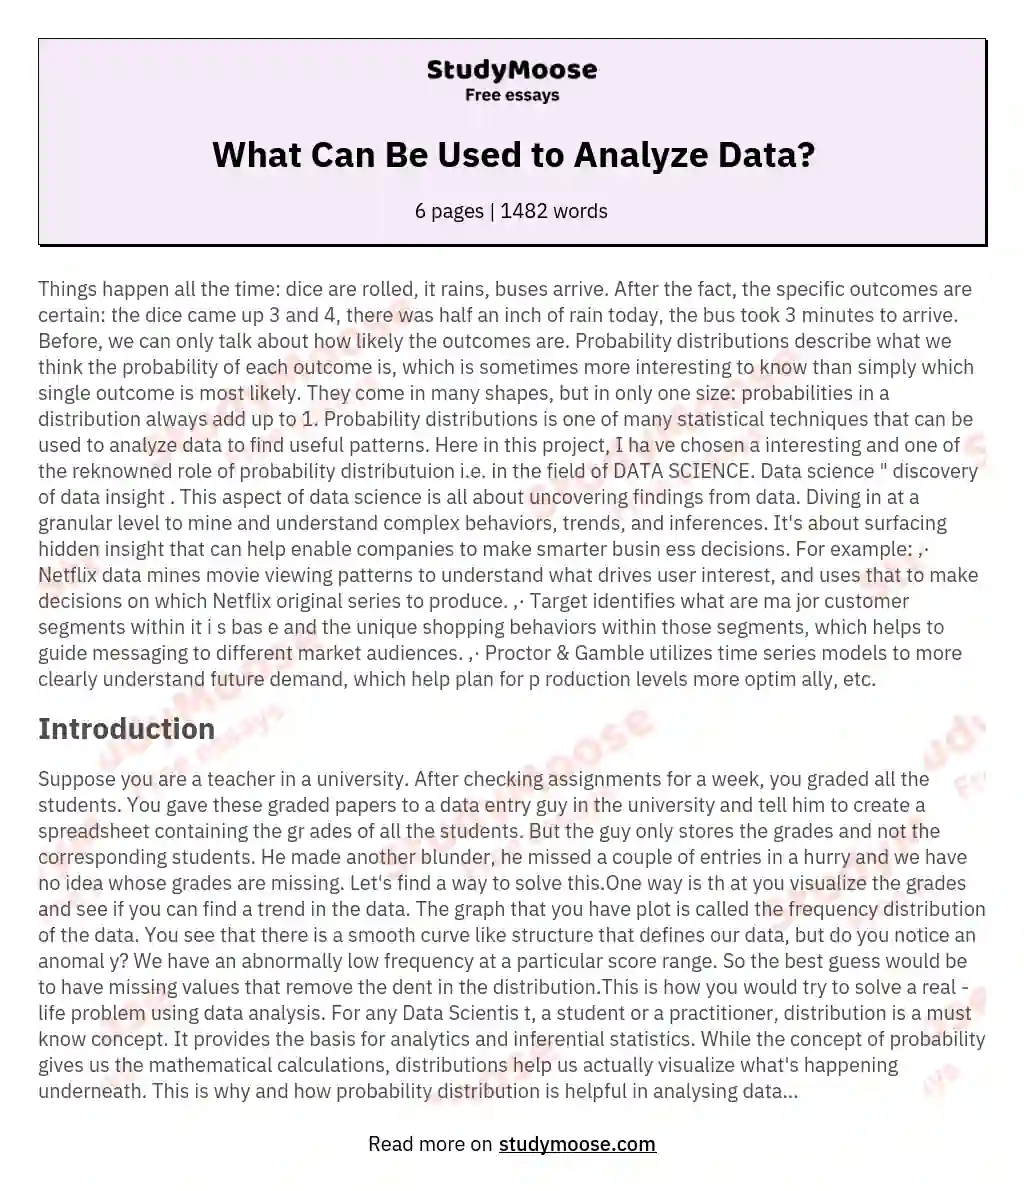 What Can Be Used to Analyze Data? essay